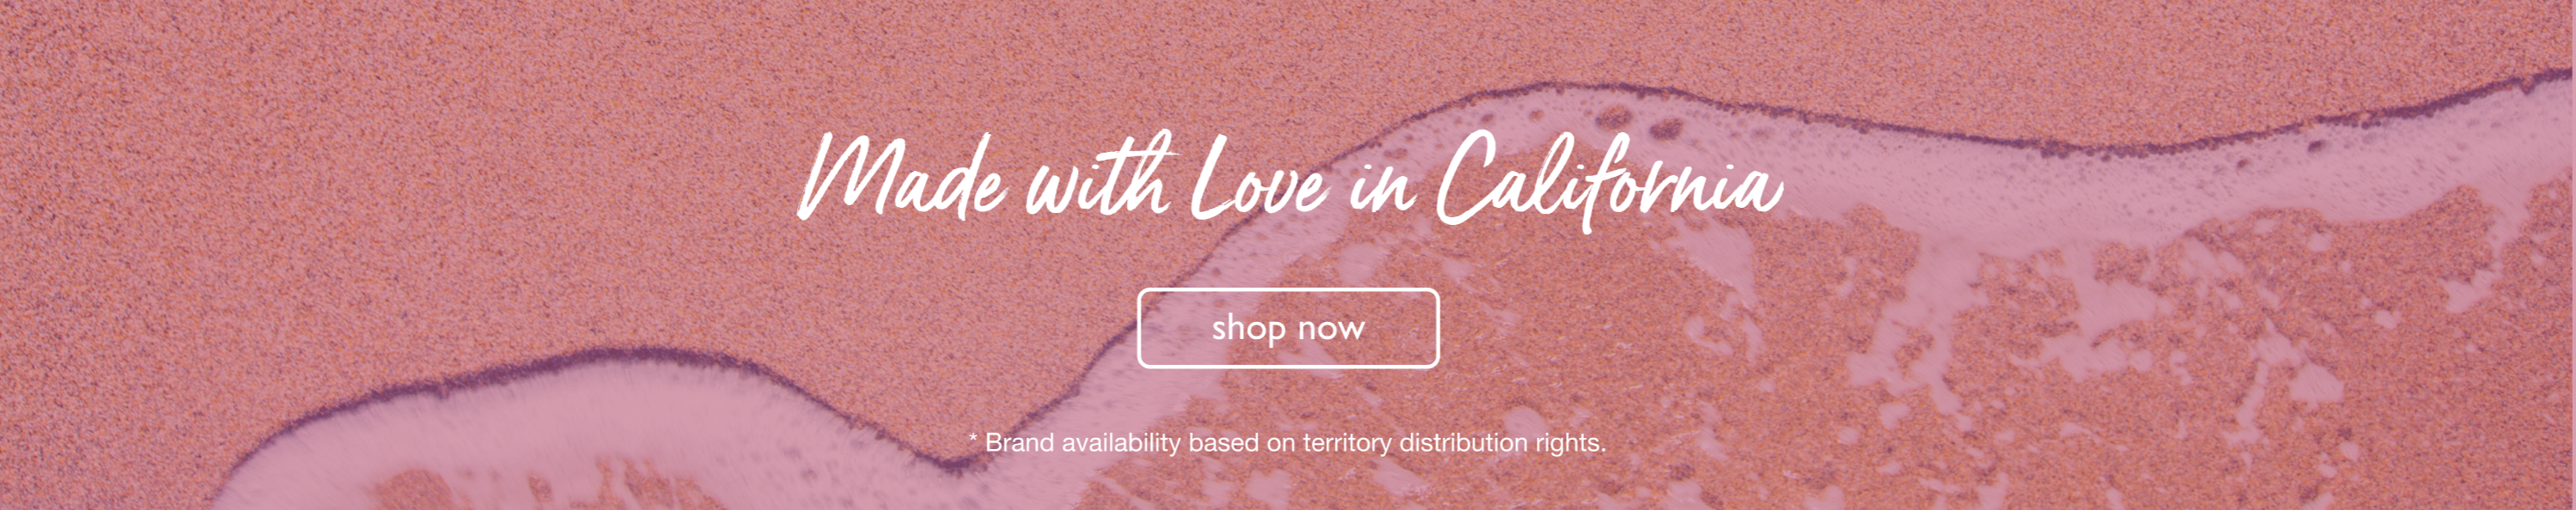 Made with love in california | Shop now | Brand availability based on territory distribution rights